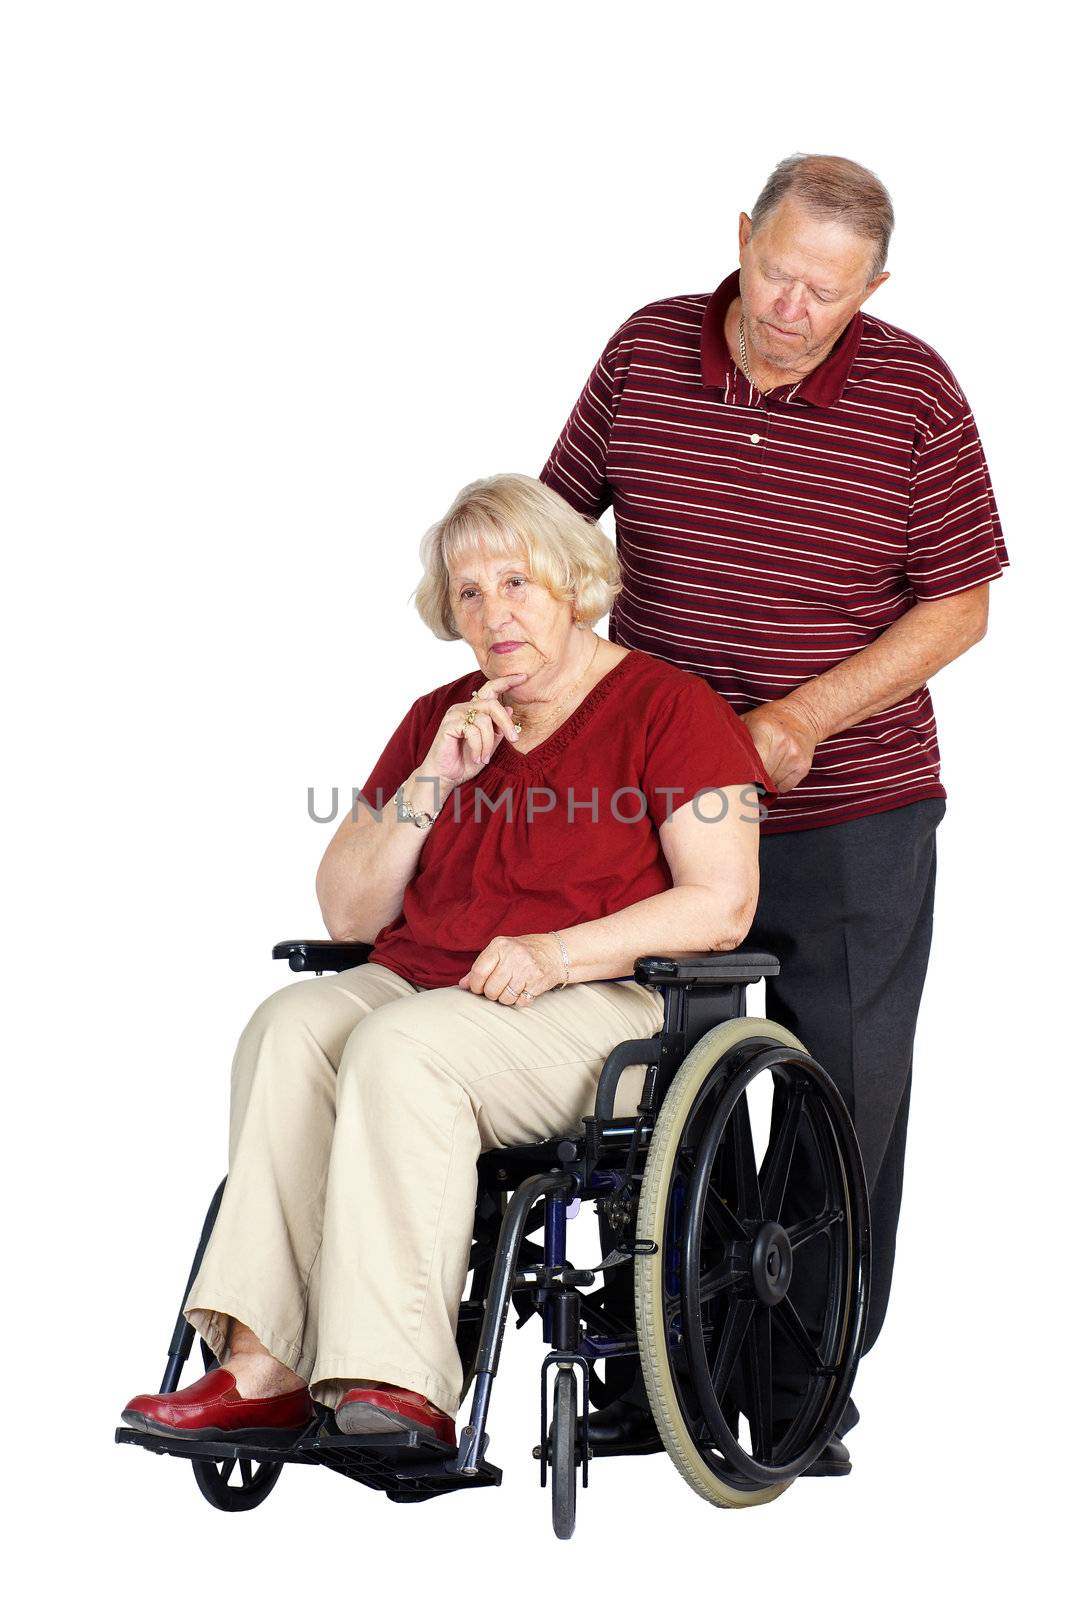 Elderly or senior couple with man caring for his wife in a wheelchair, looking sad or depressed, studio shot isolated over white background.